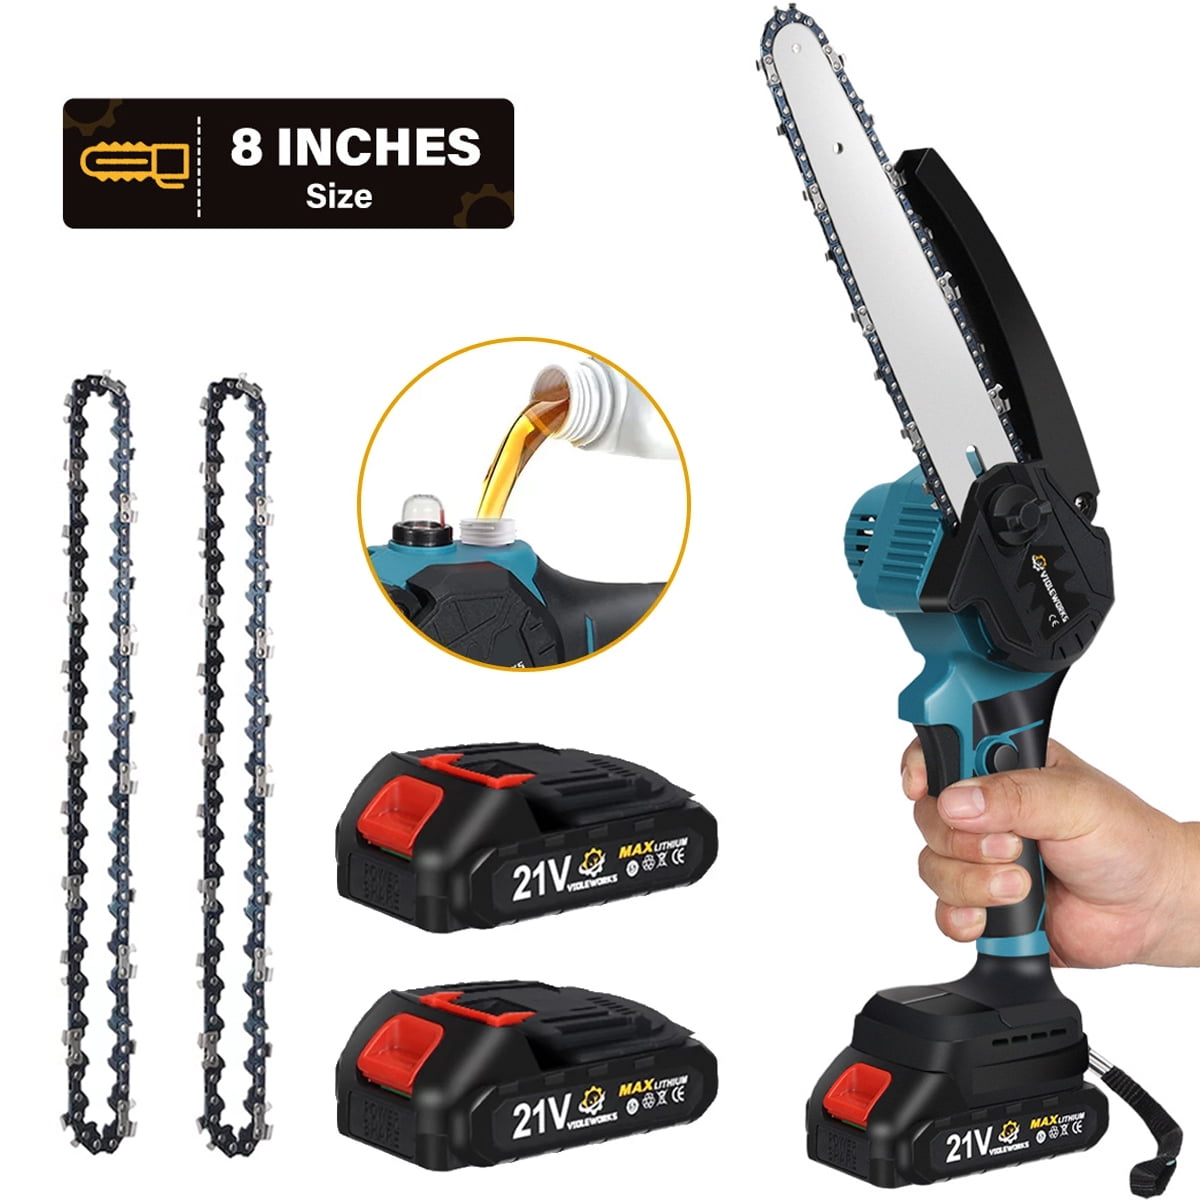 Henx 20V Mini Chain saw 2.0 AH battery and charger included, H20MNLJ04A02  at Tractor Supply Co.